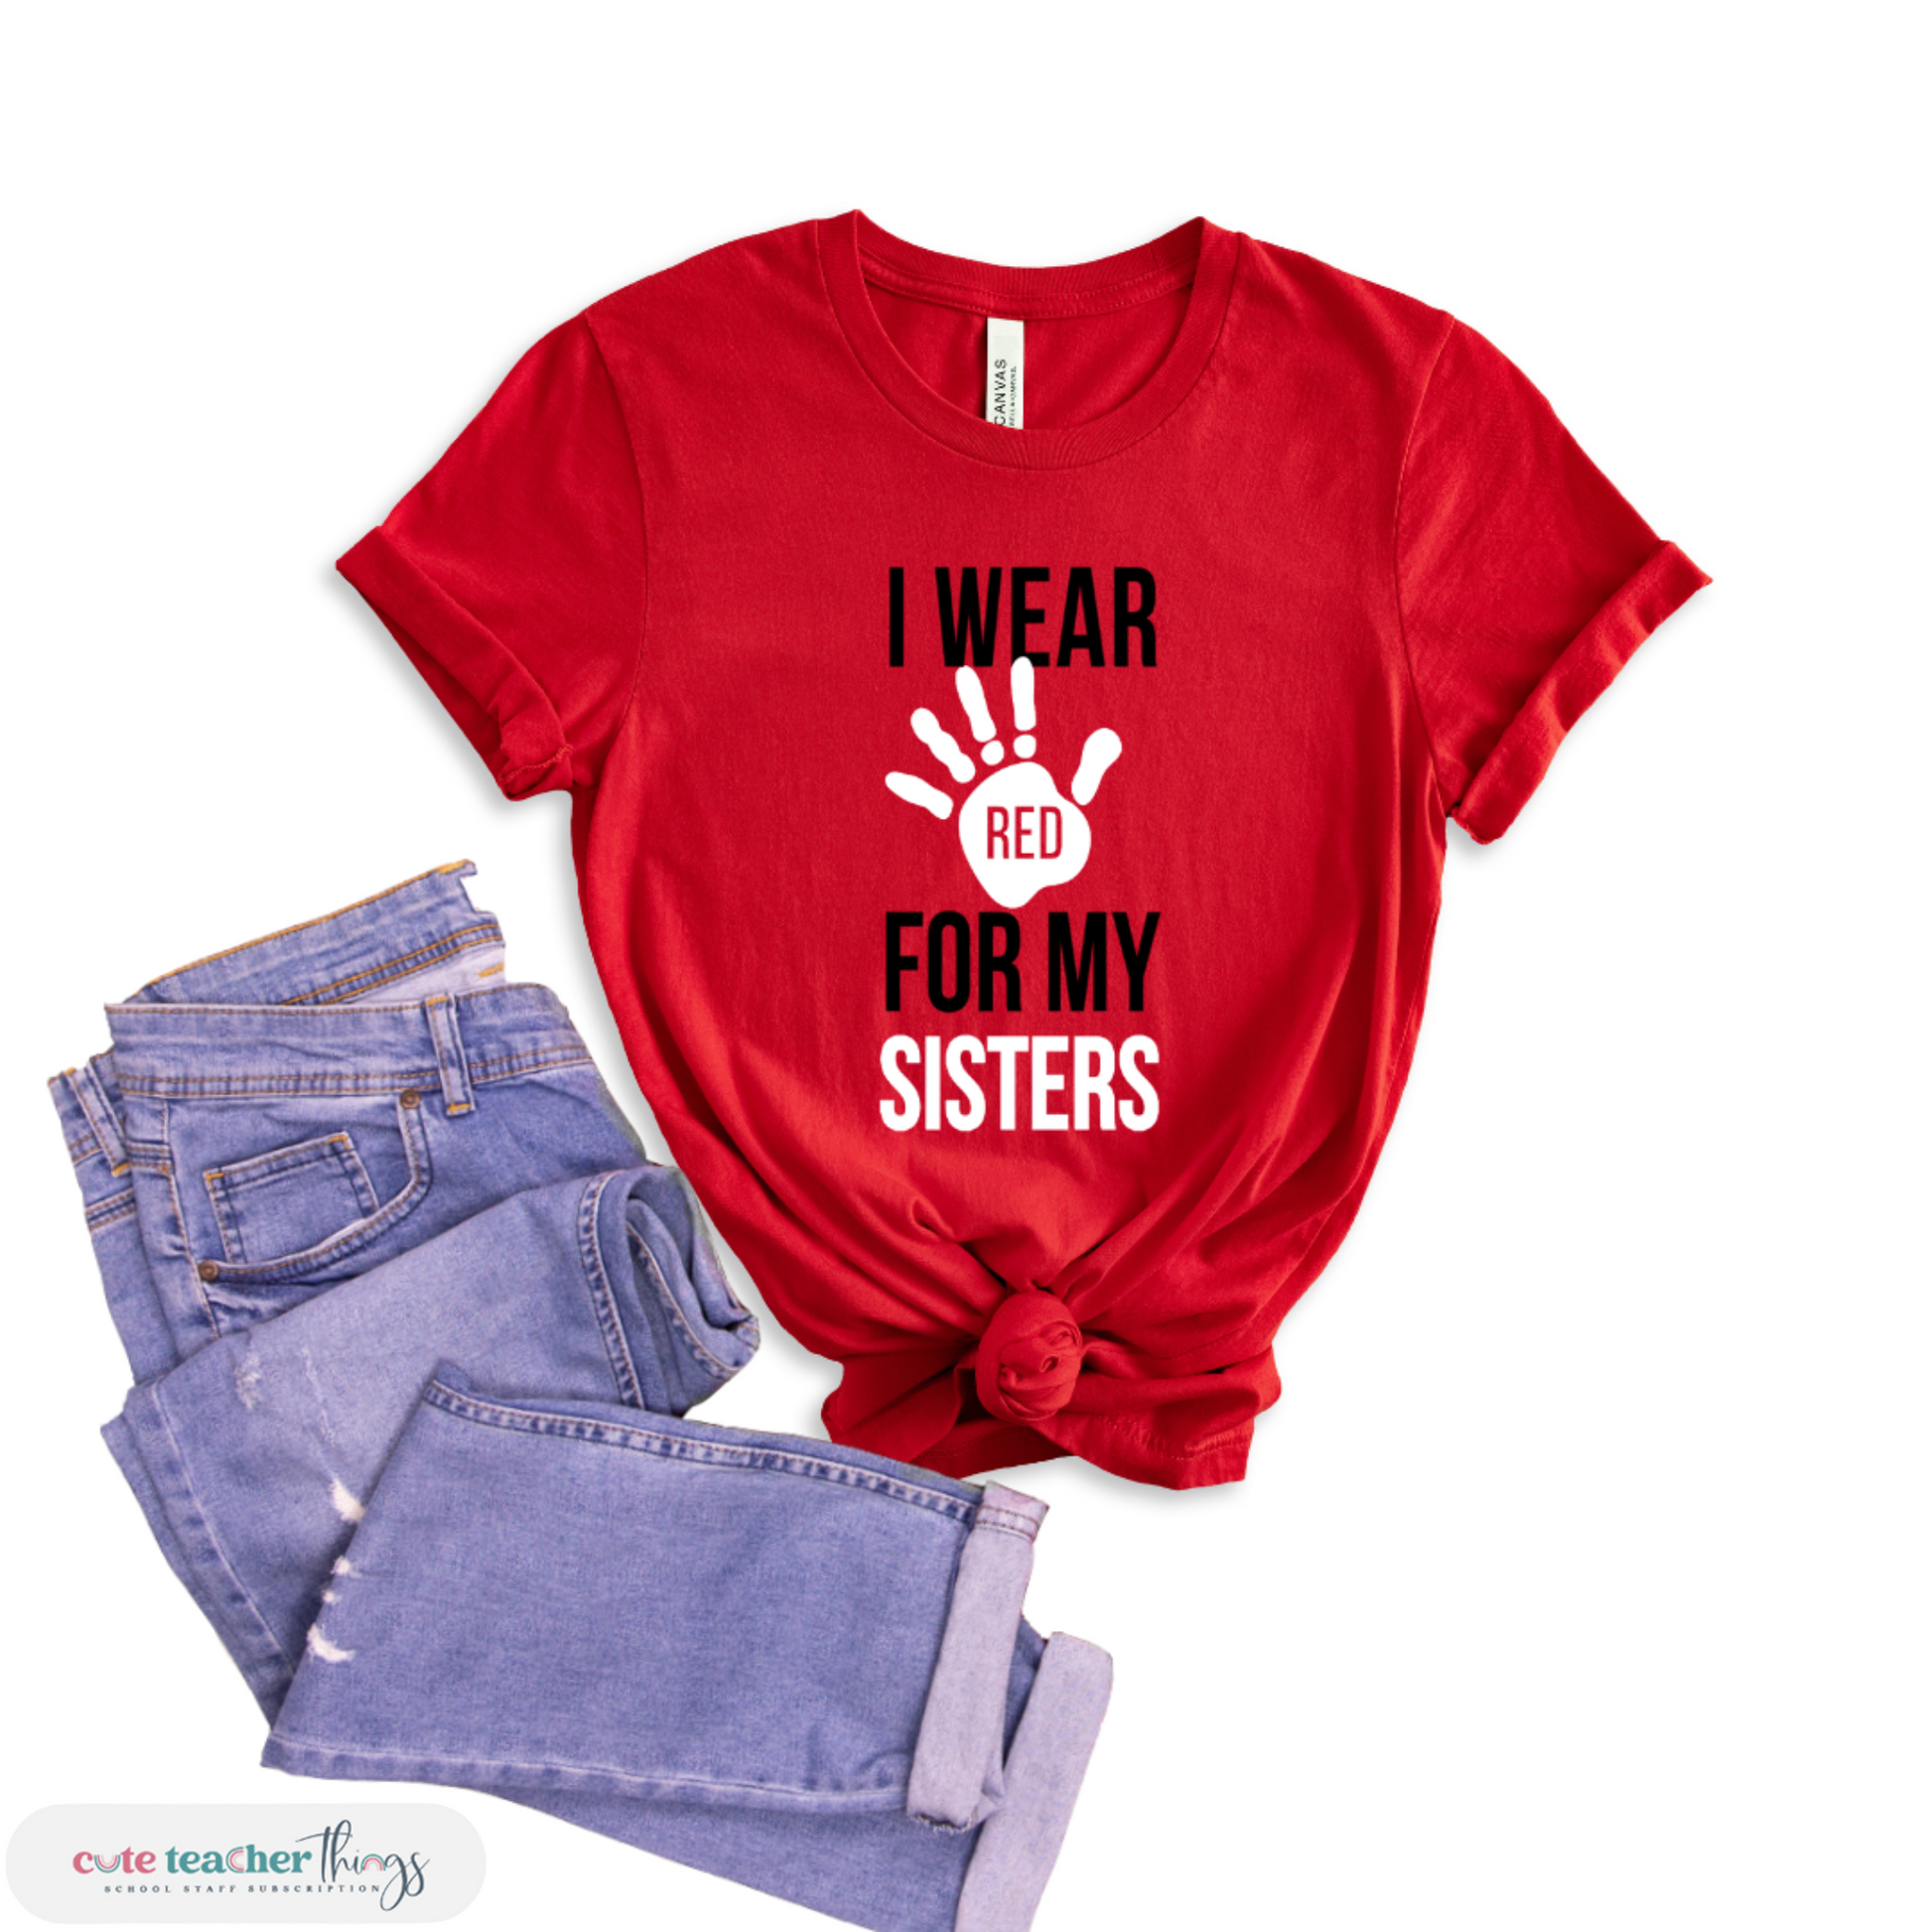 i wear red for my sisters design shirt, holiday tee